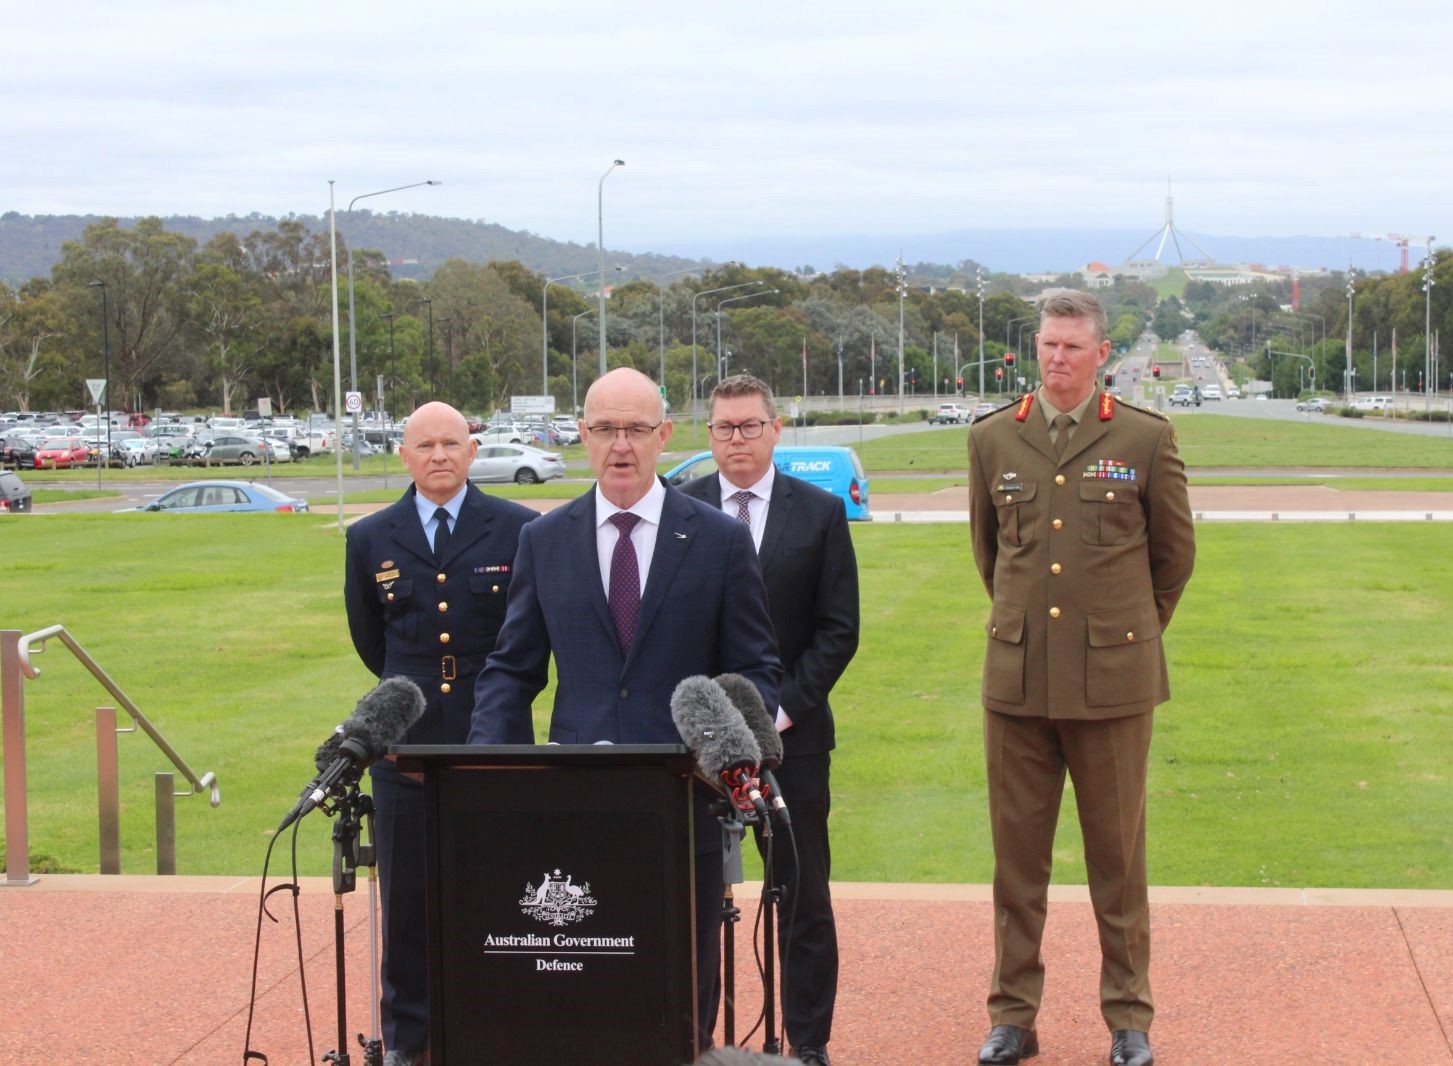 Lockheed Martin Australia Chief Executive Warren McDonald addresses media, with Air Marshal Leon Phillips, Chief of GWEO, the Hon Pat Conroy MP, Minister for Defence Industry, and Major General Richard Vagg, Head Land Capability.